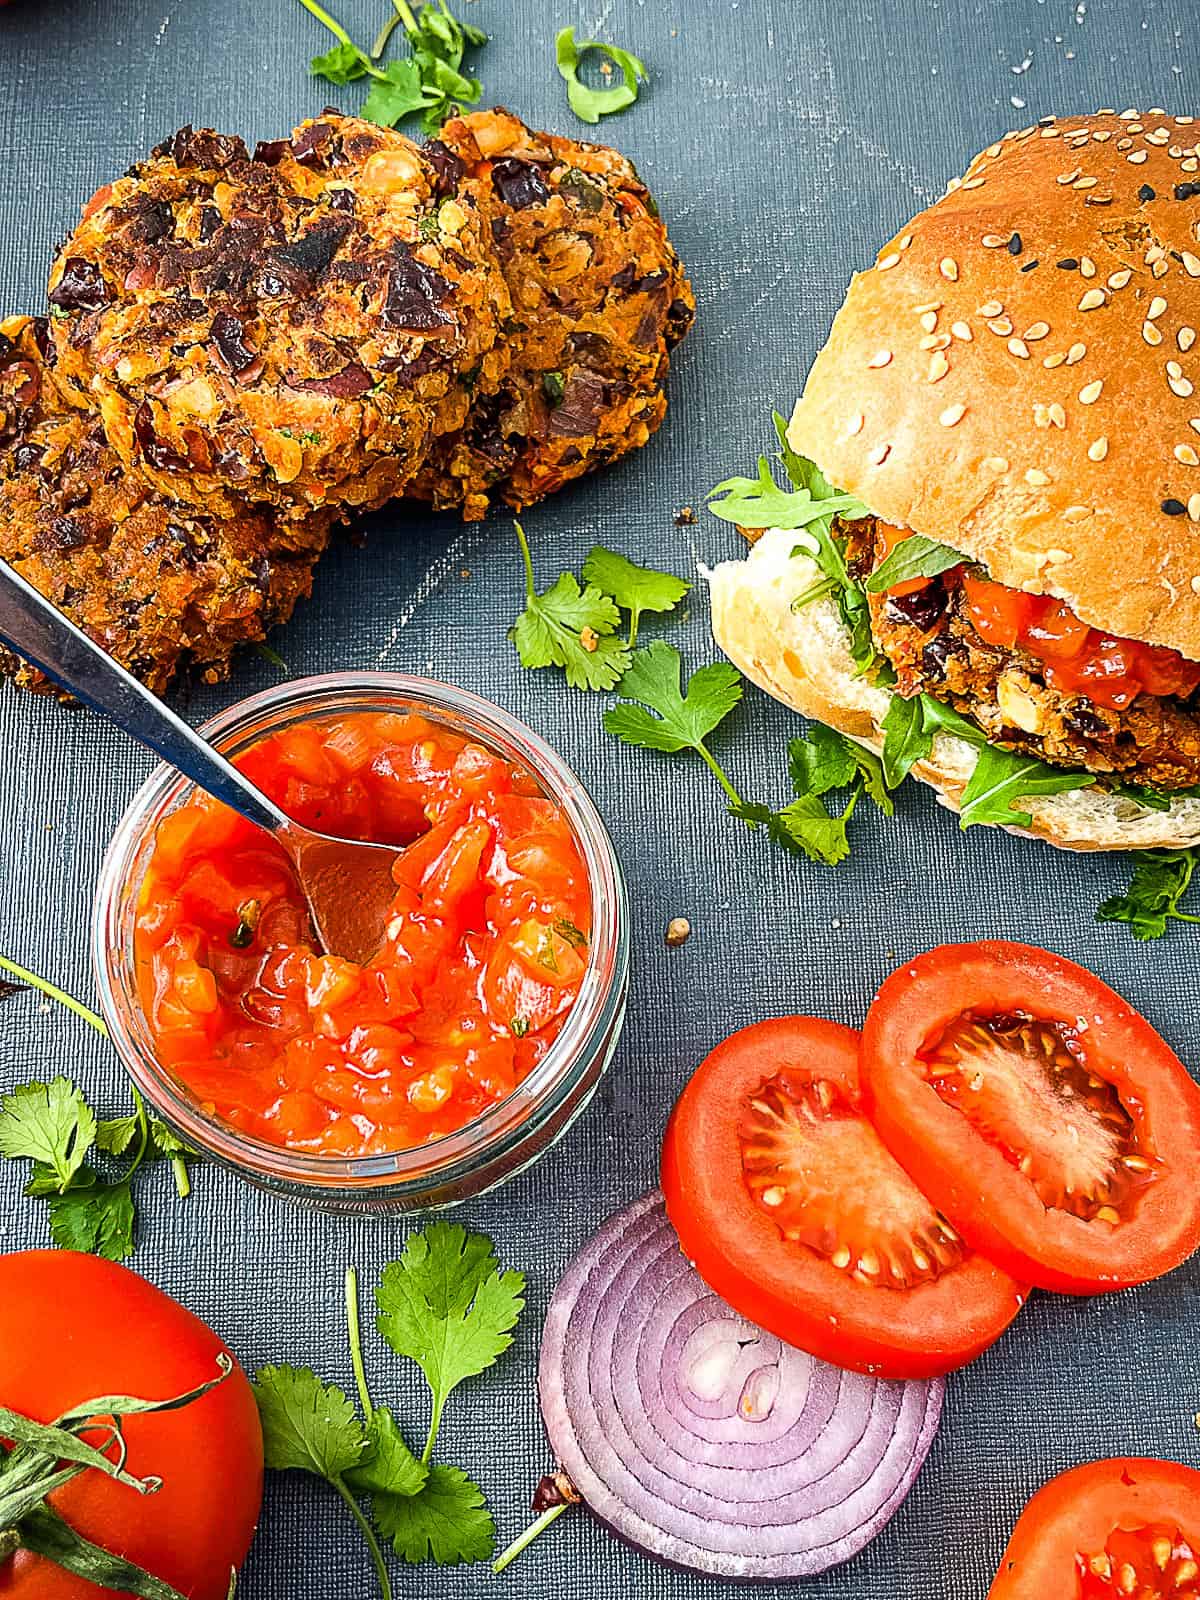 red kidney bean burgers with salsa, sliced tomato and red onion to side